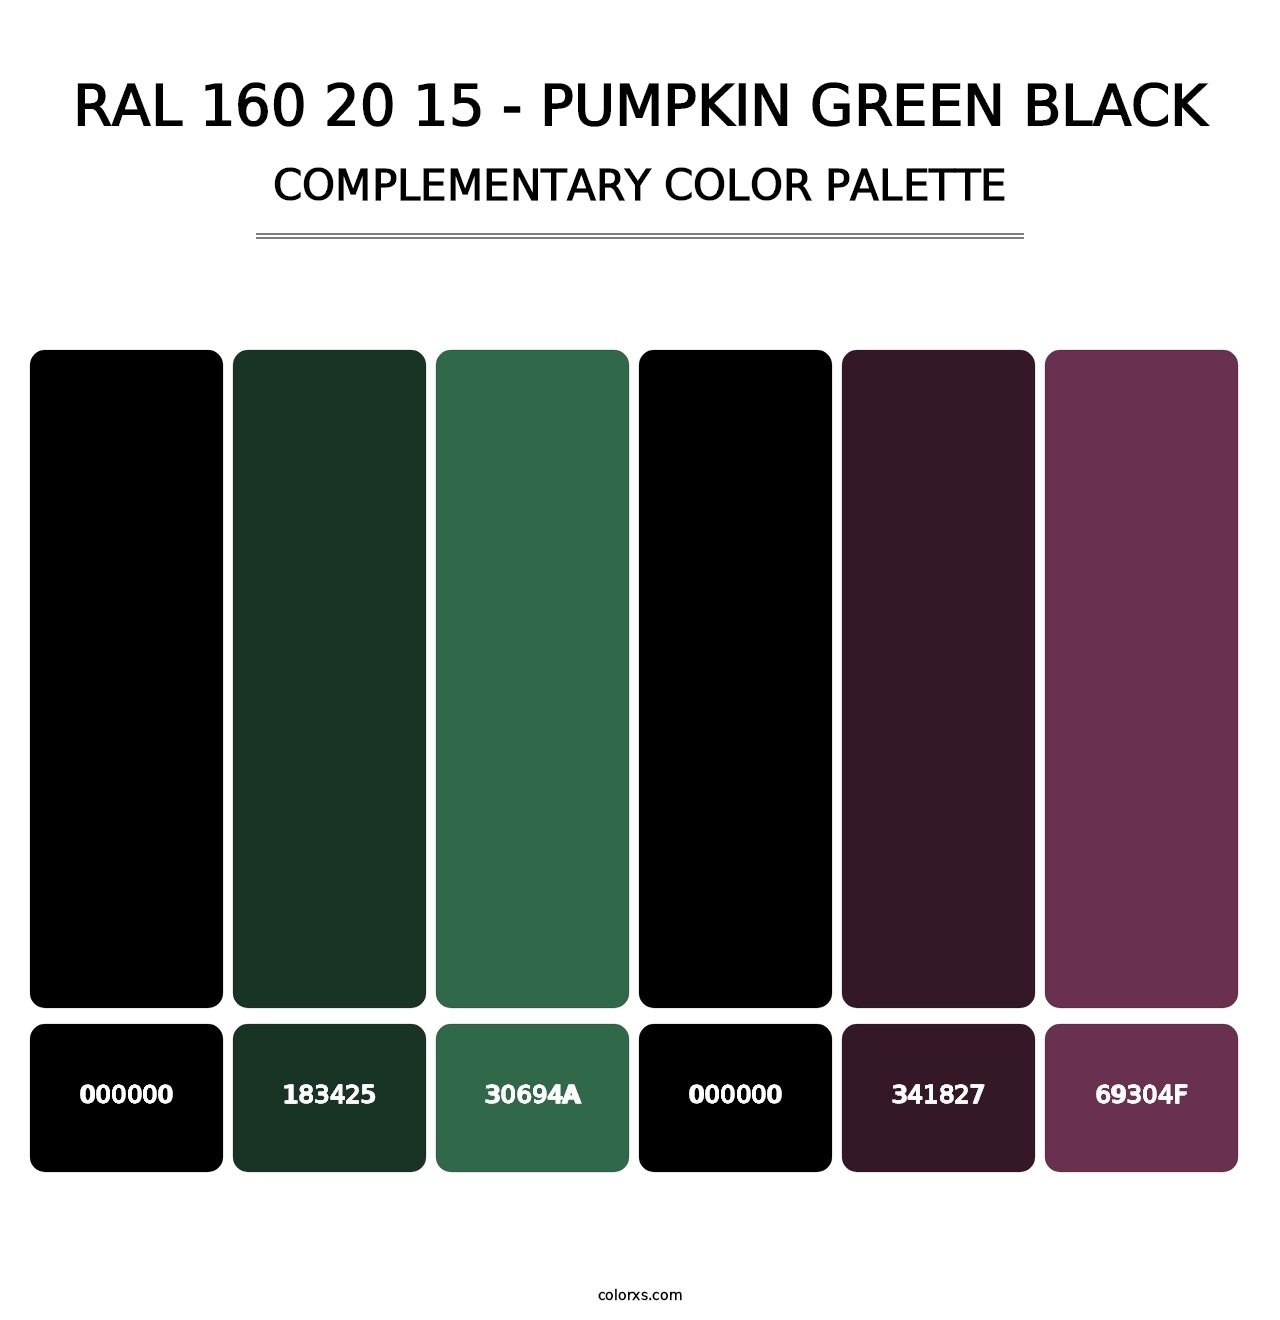 RAL 160 20 15 - Pumpkin Green Black - Complementary Color Palette